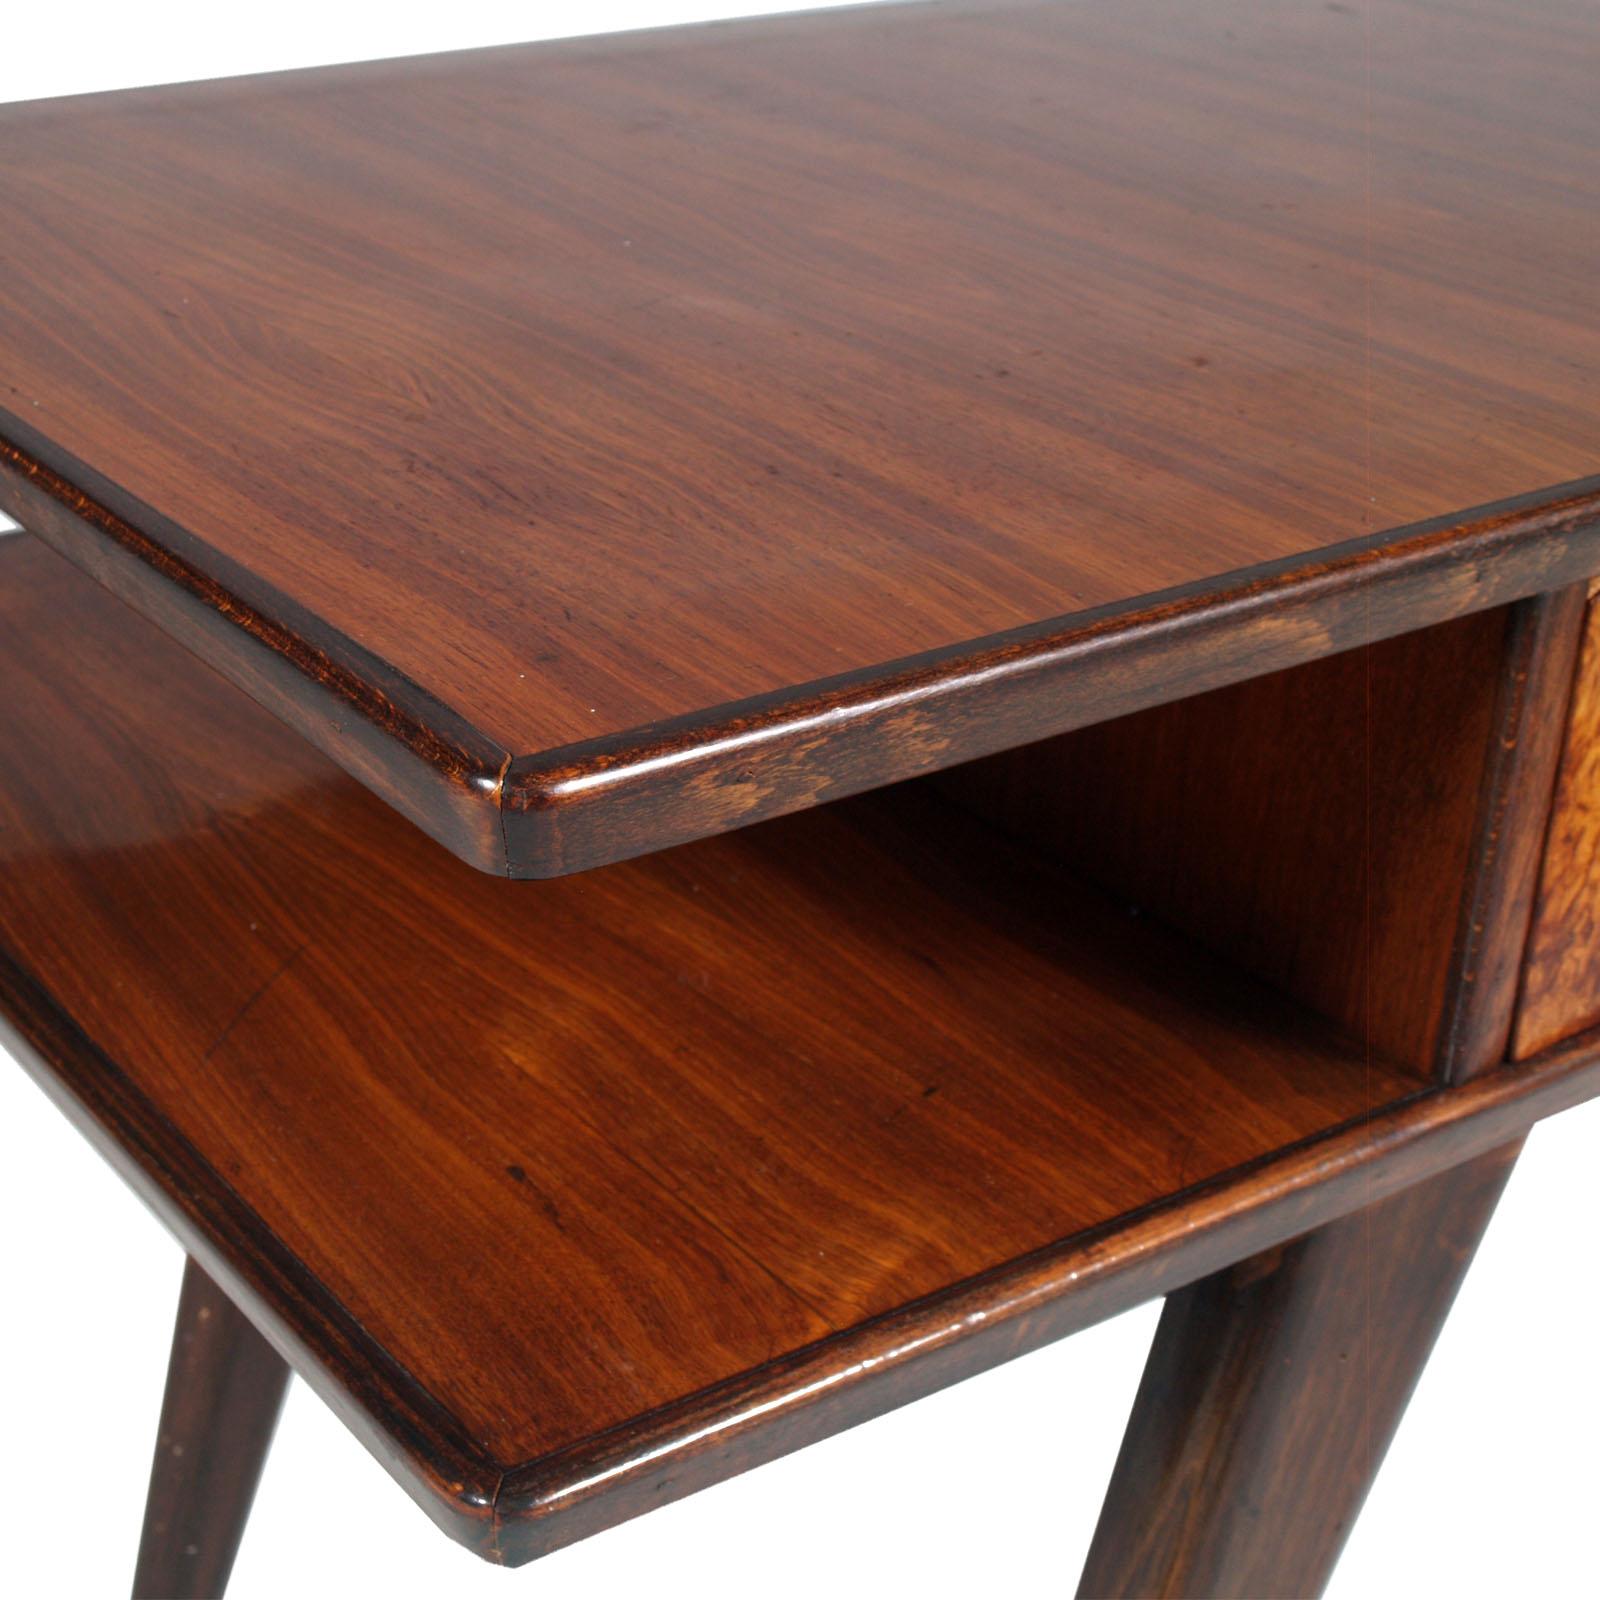 1940s Writing Desk by Ico Parisi for Brugnoli Mobili, Cantu, Wax-Polished In Good Condition For Sale In Vigonza, Padua